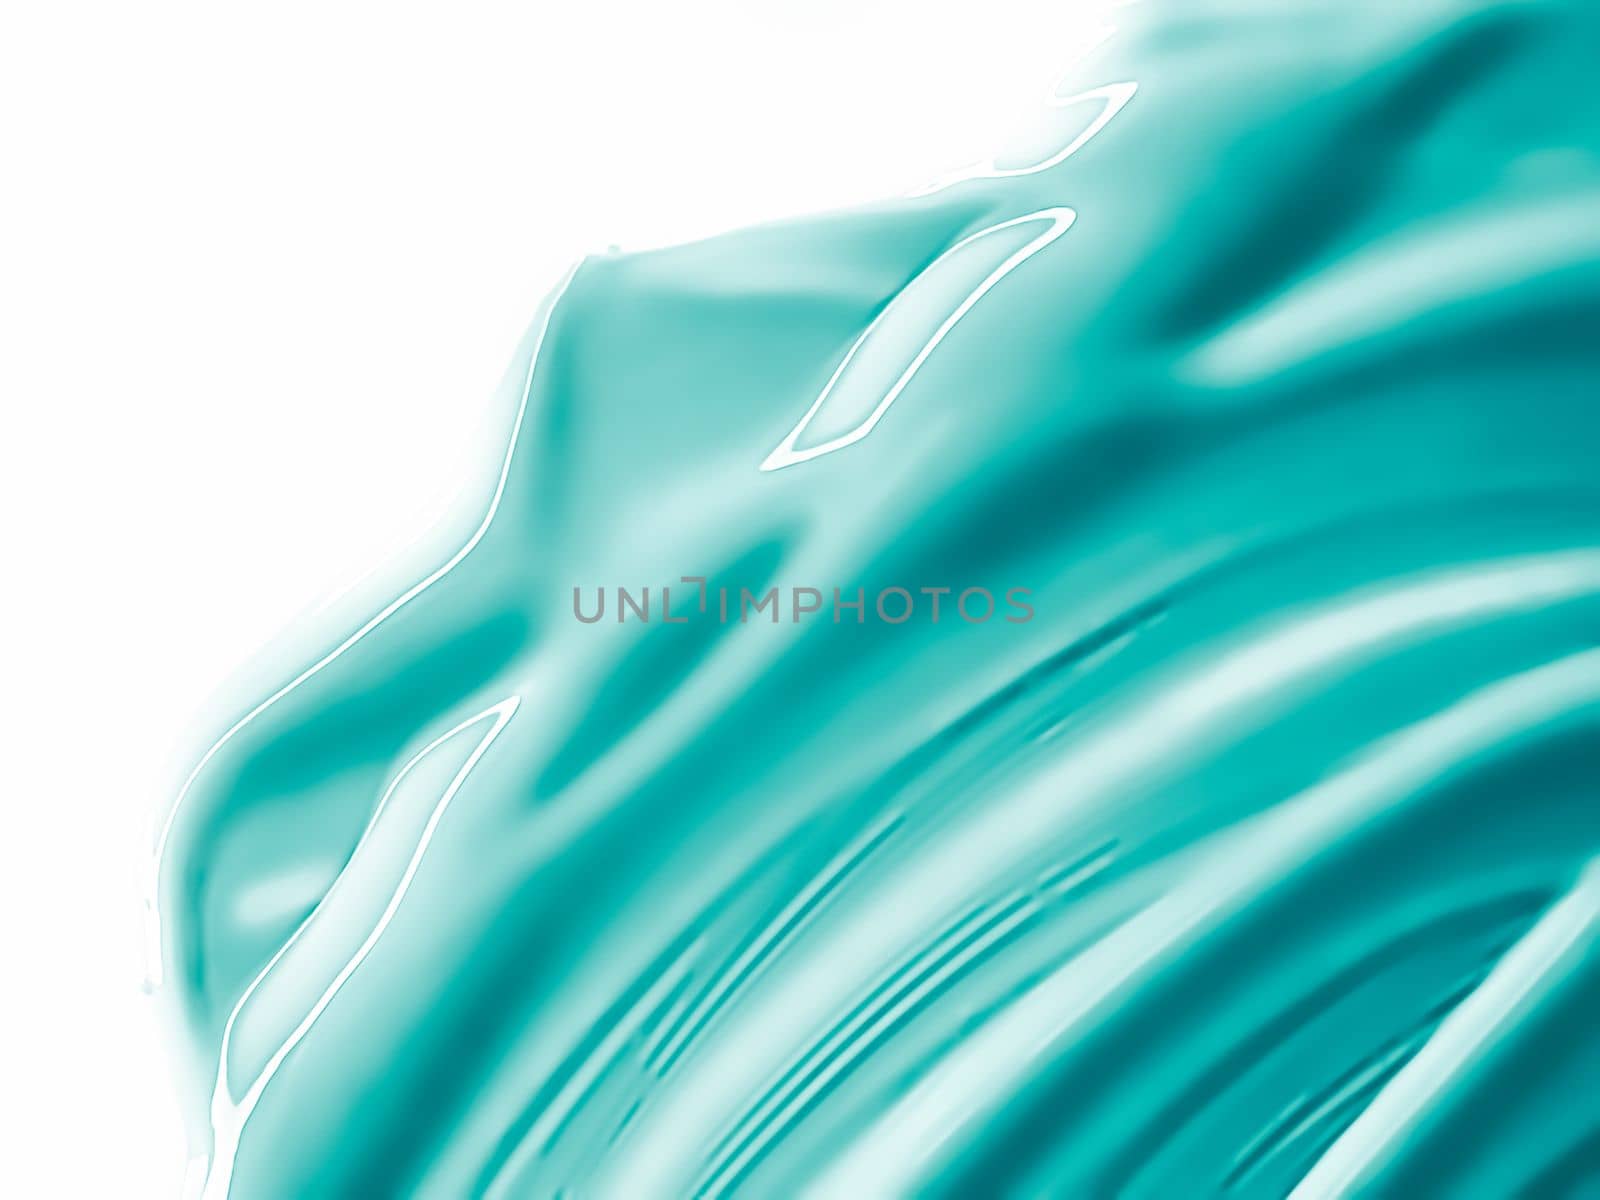 Glossy green cosmetic texture as beauty make-up product background, cosmetics and luxury makeup brand design concept